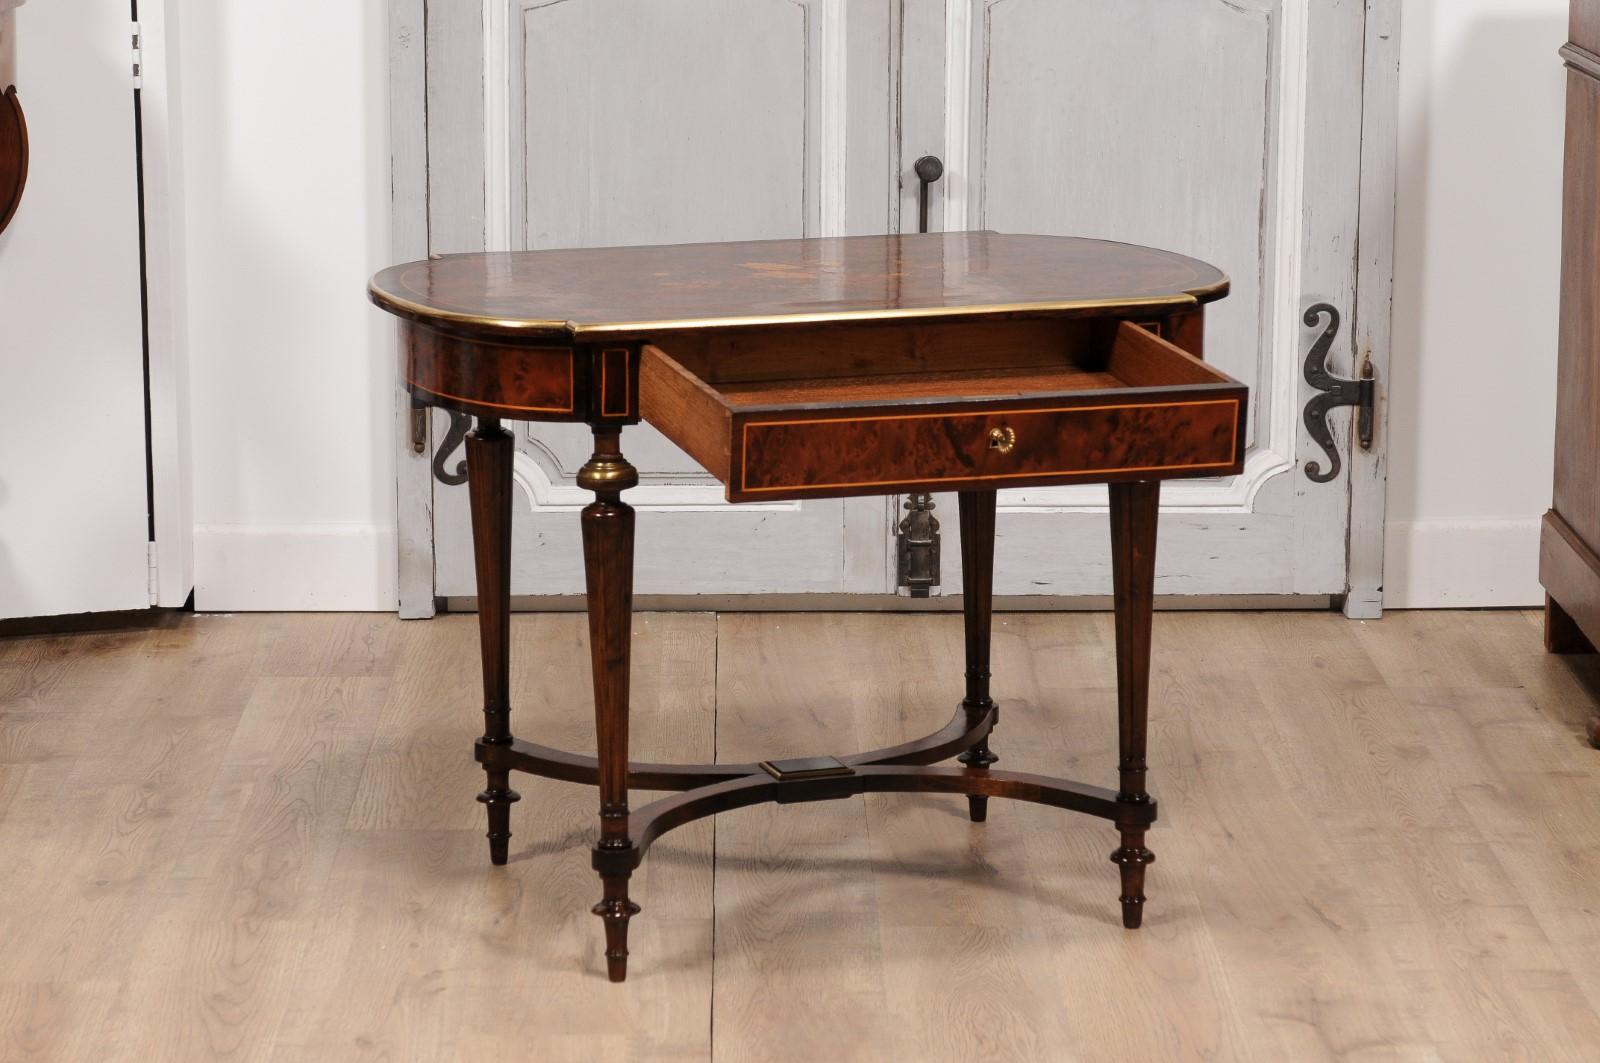 Italian 1890s Walnut, Mahogany and Brass Side Table with Floral Marquetry Décor For Sale 3